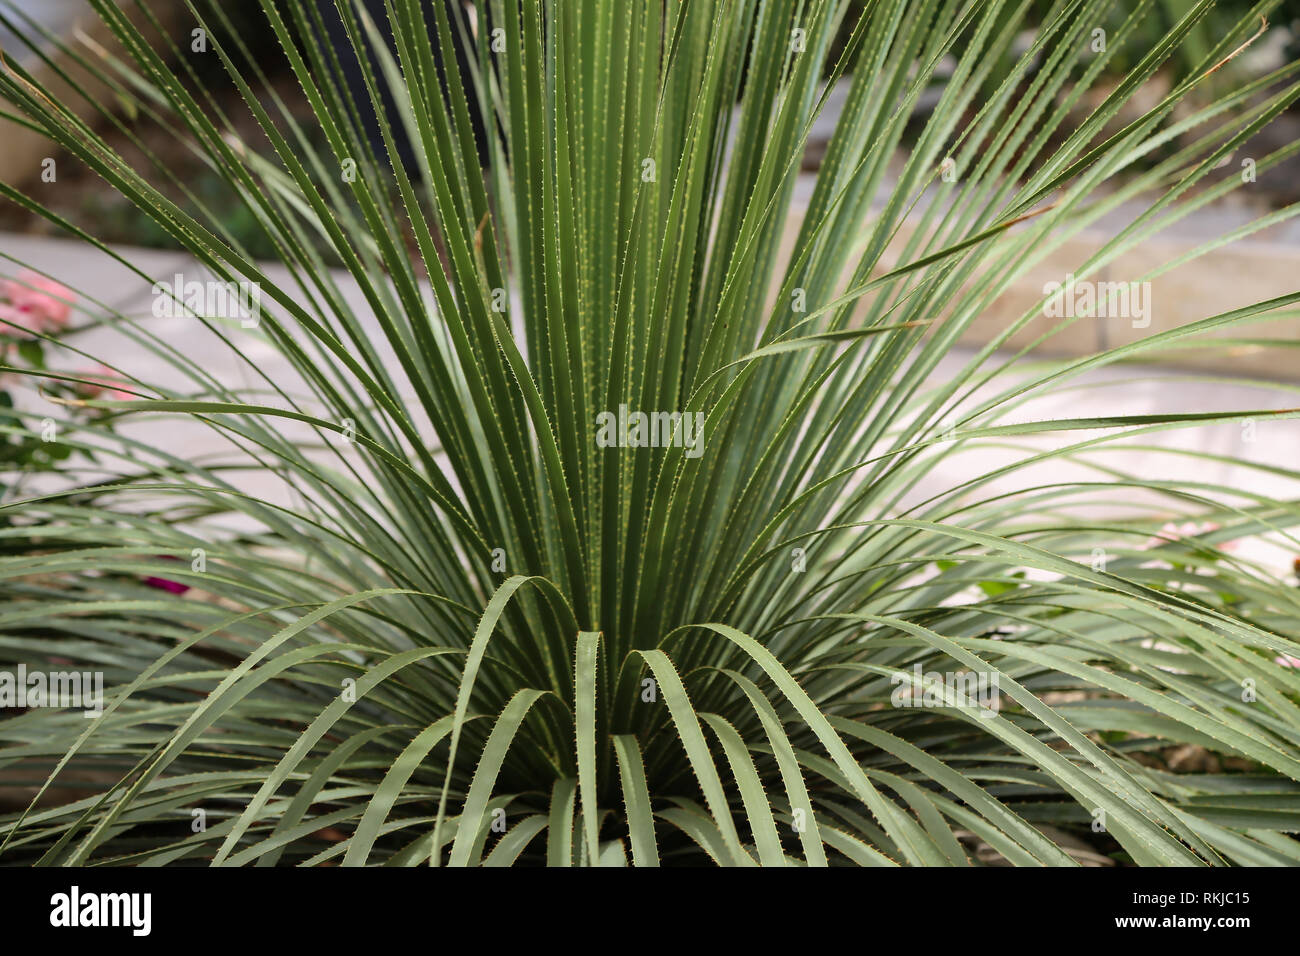 Dasylirion wheeleri. Desert Mexican plant with spiked long leaves. Stock Photo